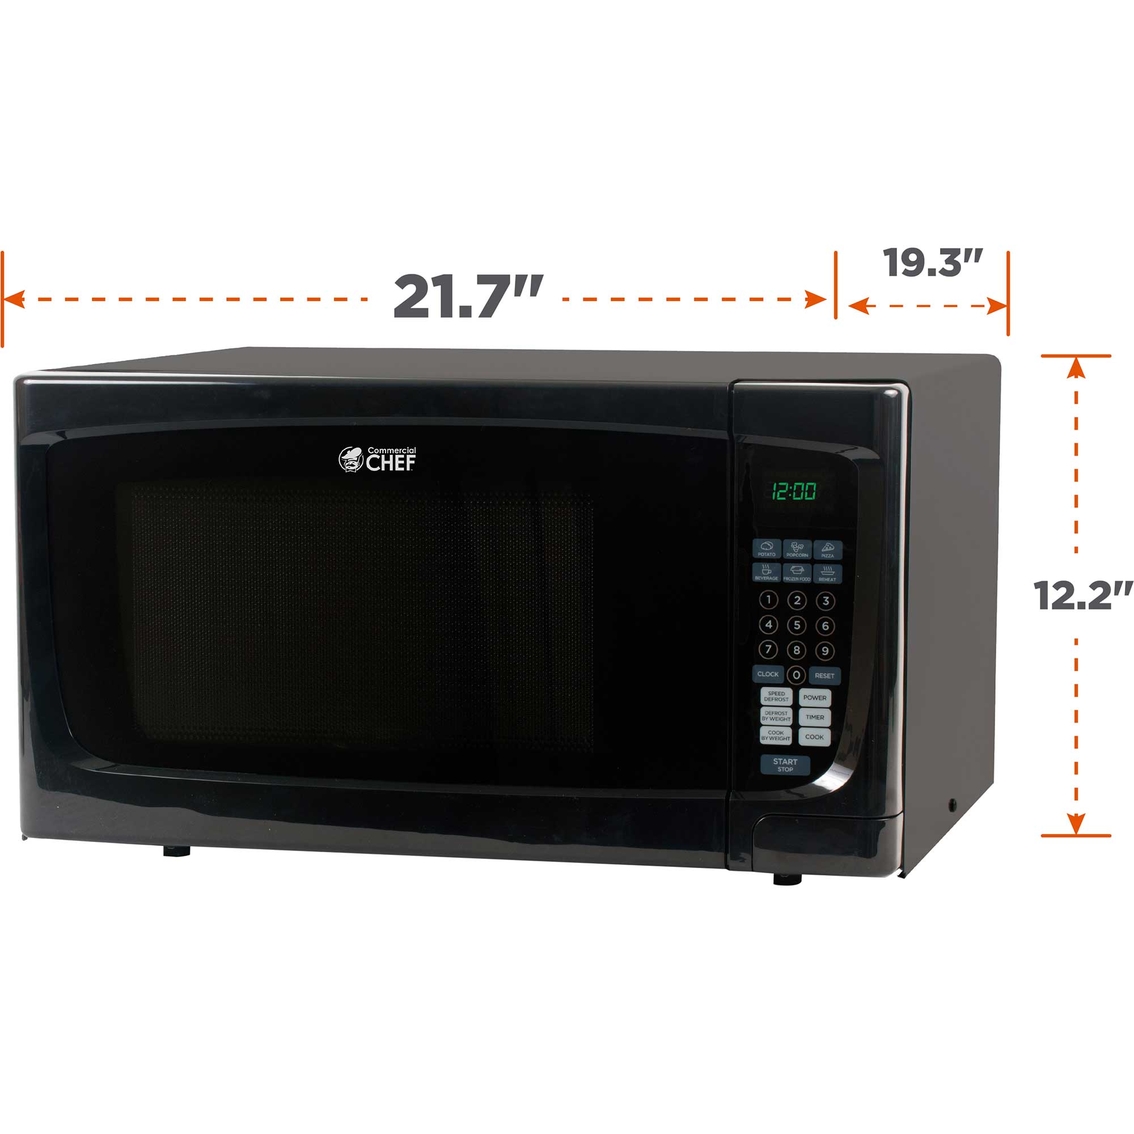 Commercial Chef 1.6 cu. ft. Counter Top Microwave - Image 3 of 7